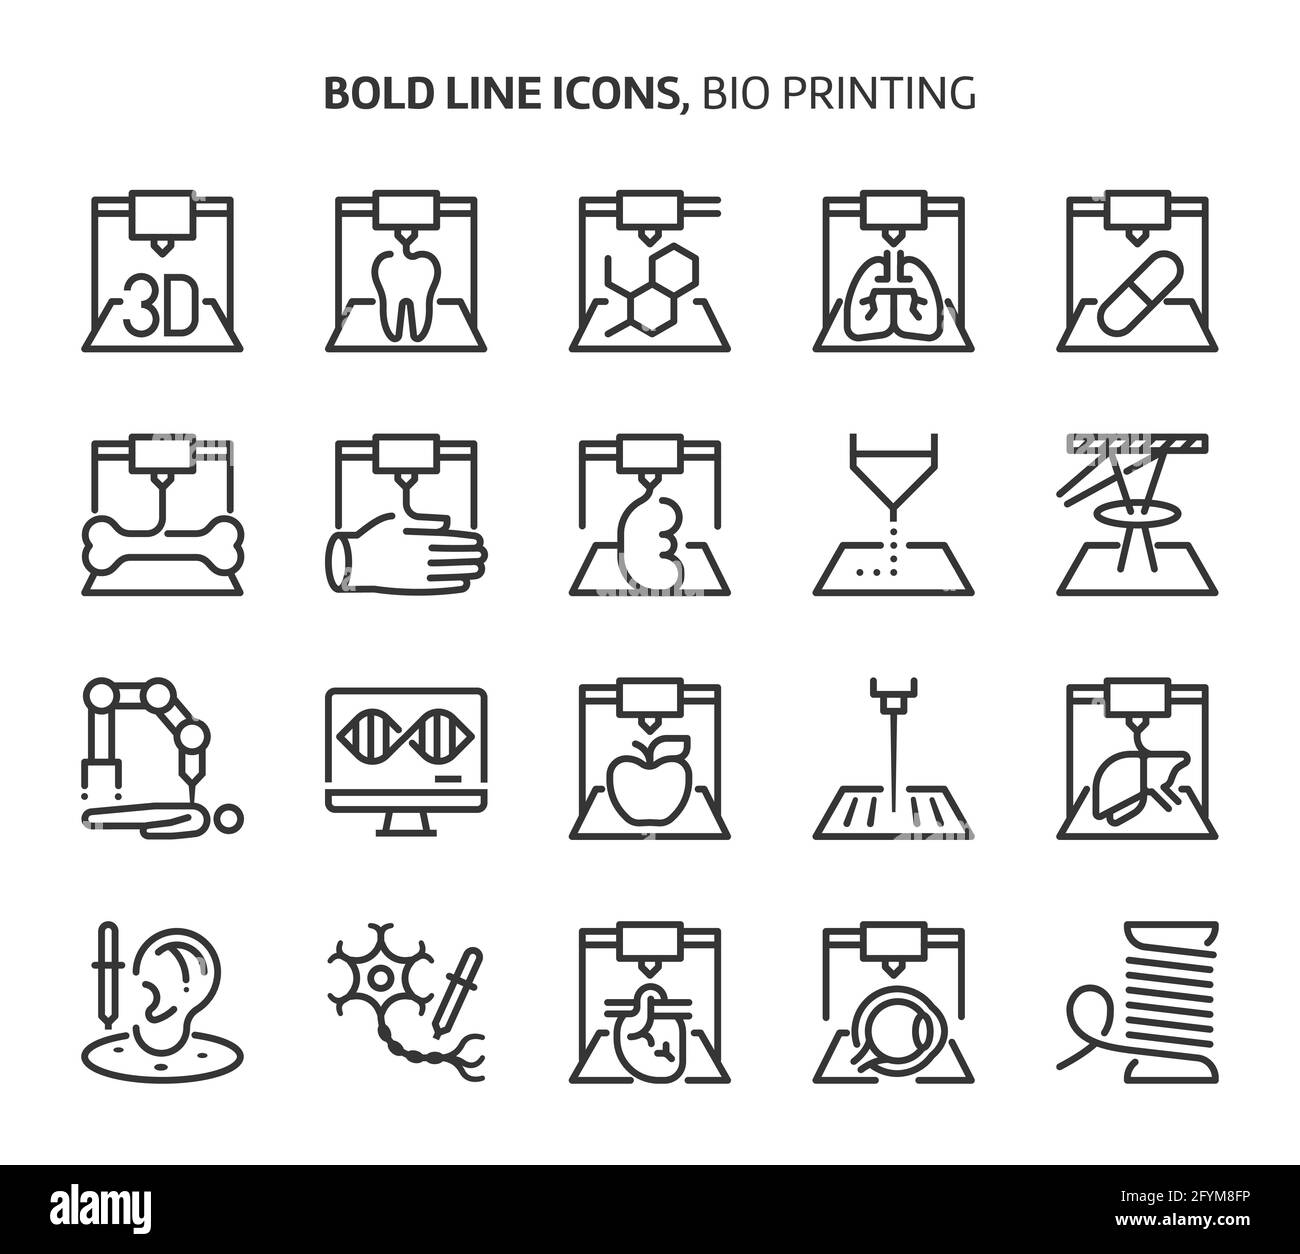 Bio printing, bold line icons. The illustrations are a vector, editable stroke, 48x48 pixel perfect files. Crafted with precision and eye for quality. Stock Vector